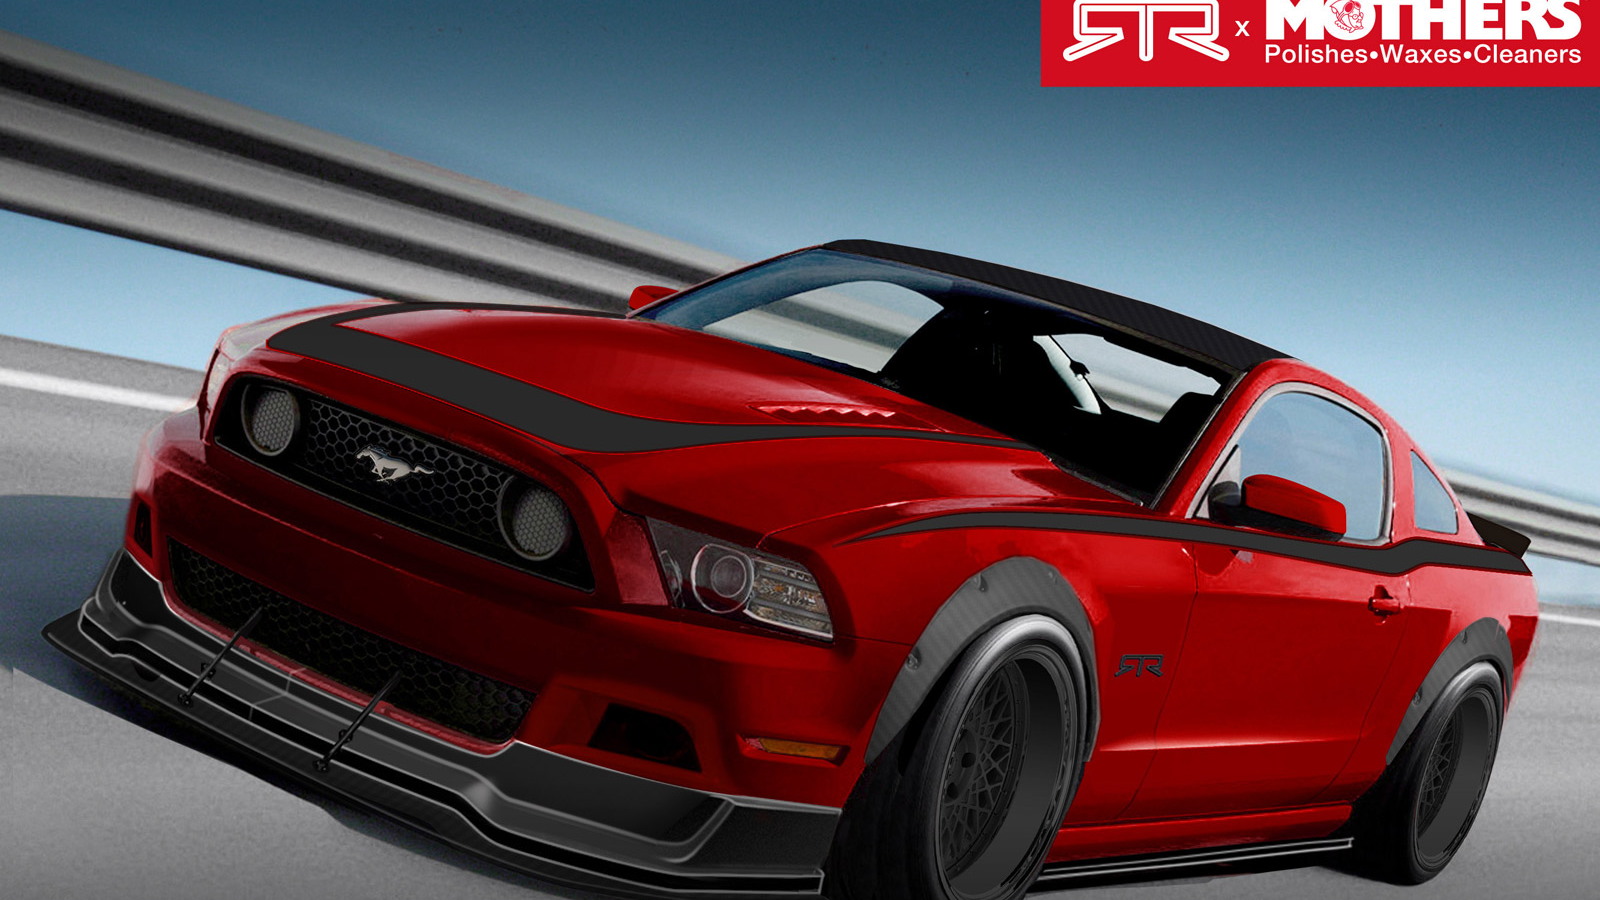 2013 Ford Mustang GT - Built by Mothers, Autosport Dynamics, RTR